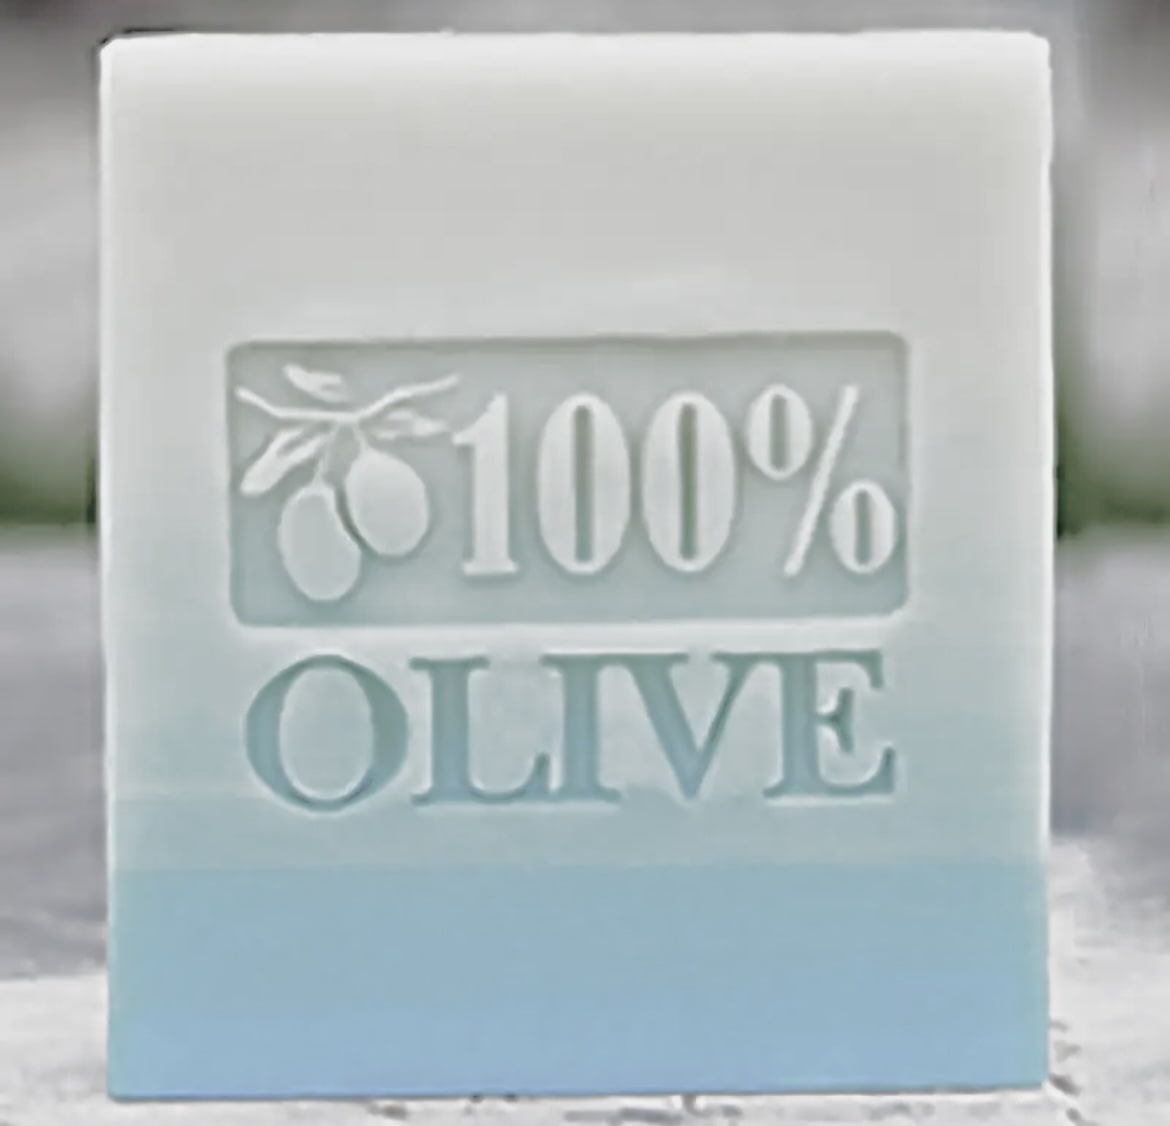 Soap stamp acrylic glass transparent large with handle 100% Olive Soap 